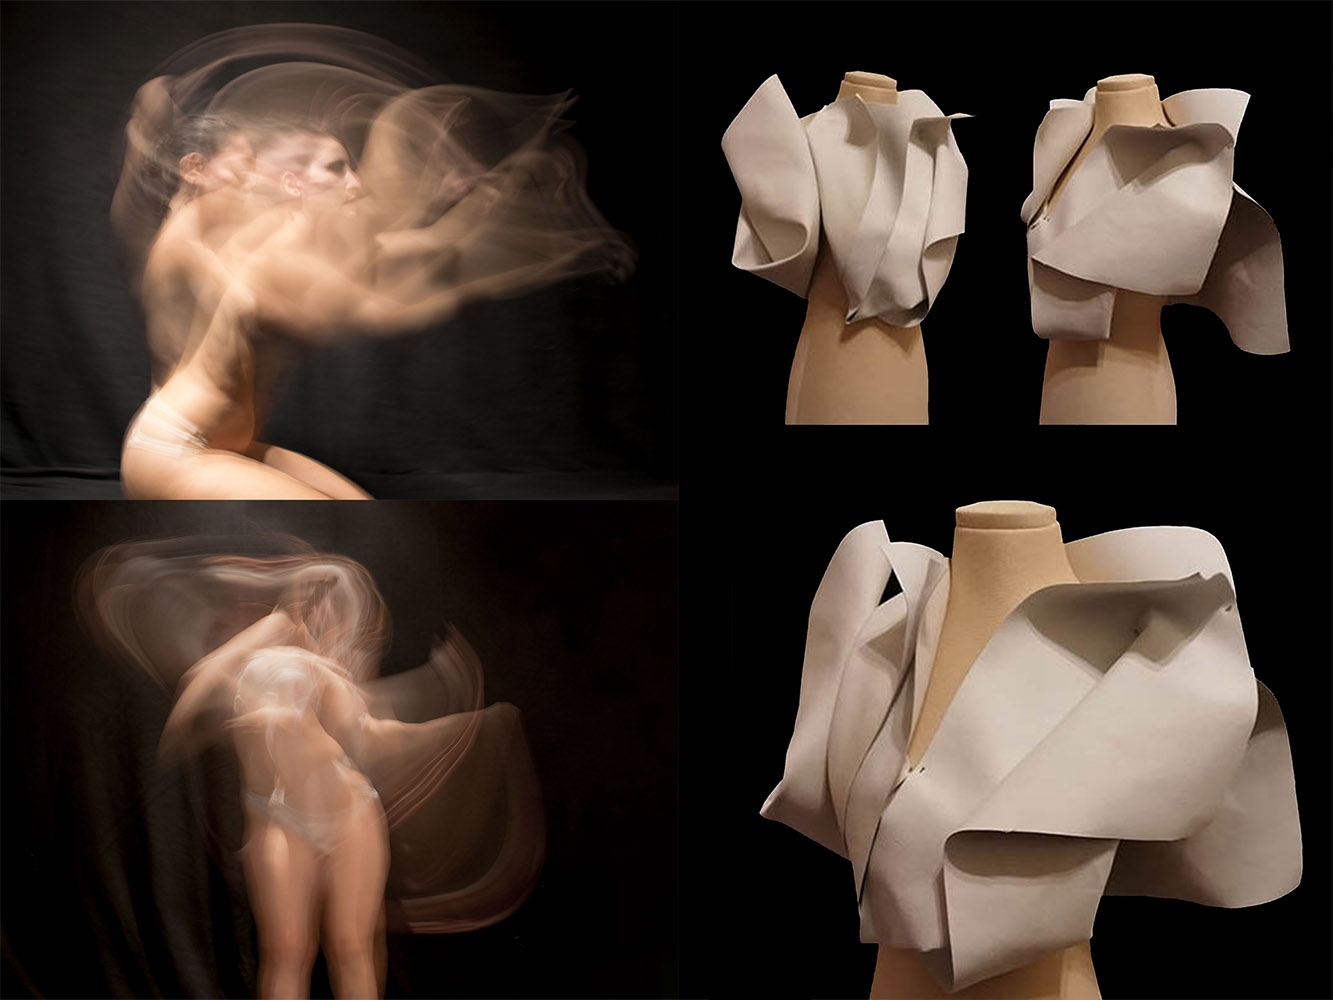 Multiple images including photography of a woman creating movement and shadows with her body and 3 images of a mannequin with layered materials that represent the models movement